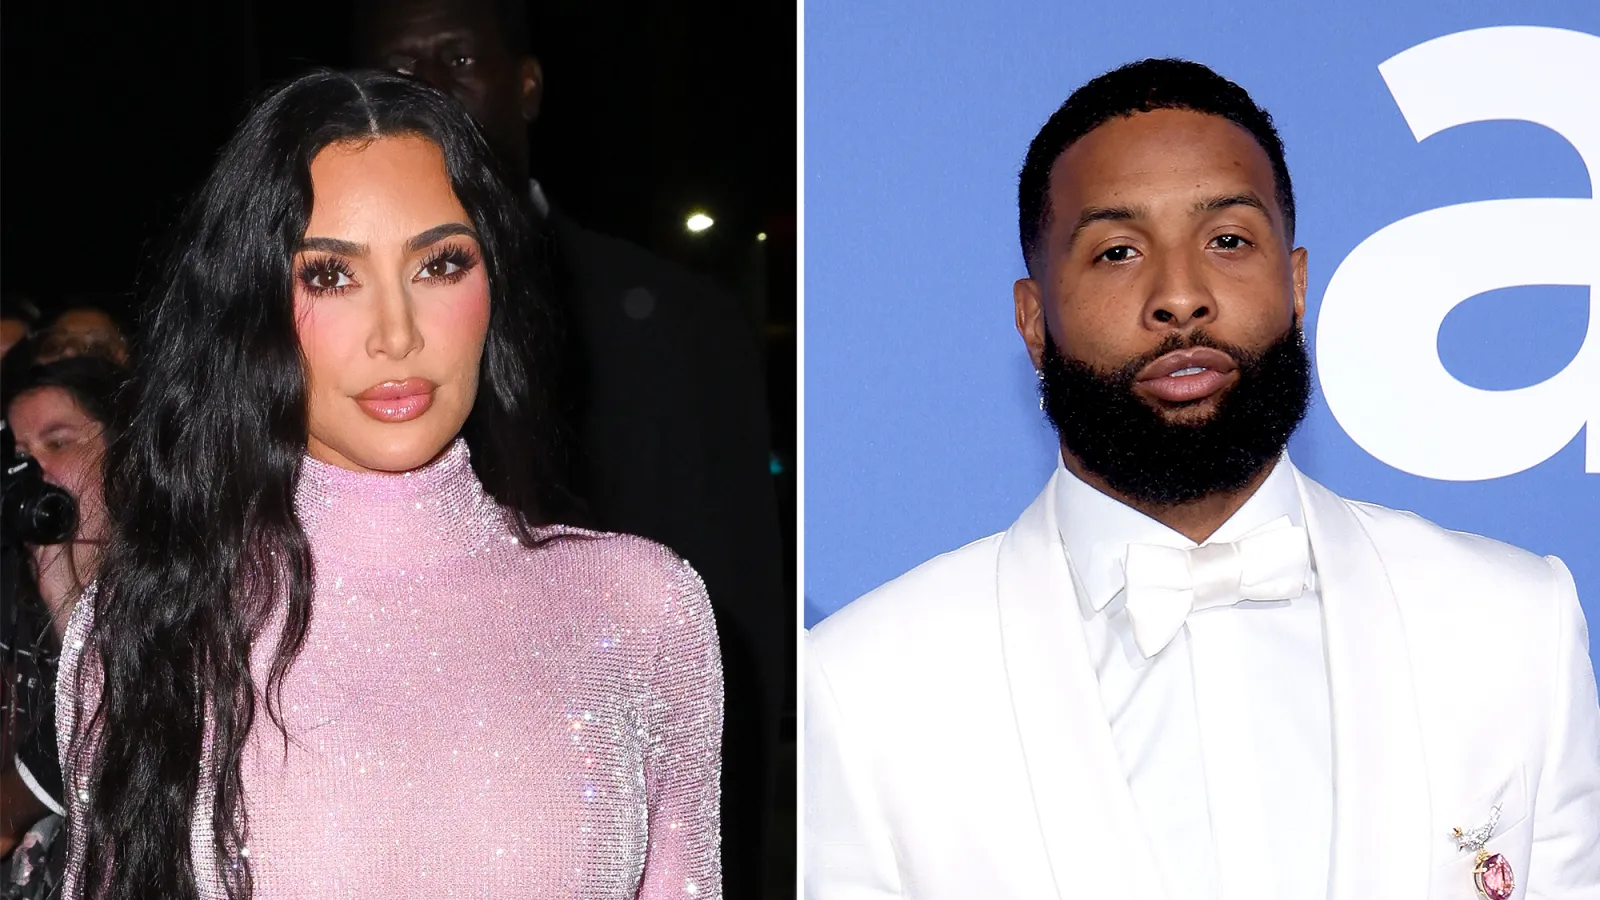 Photos of Kim Kardashian And Odell Beckham Jr.'s Partying Together on